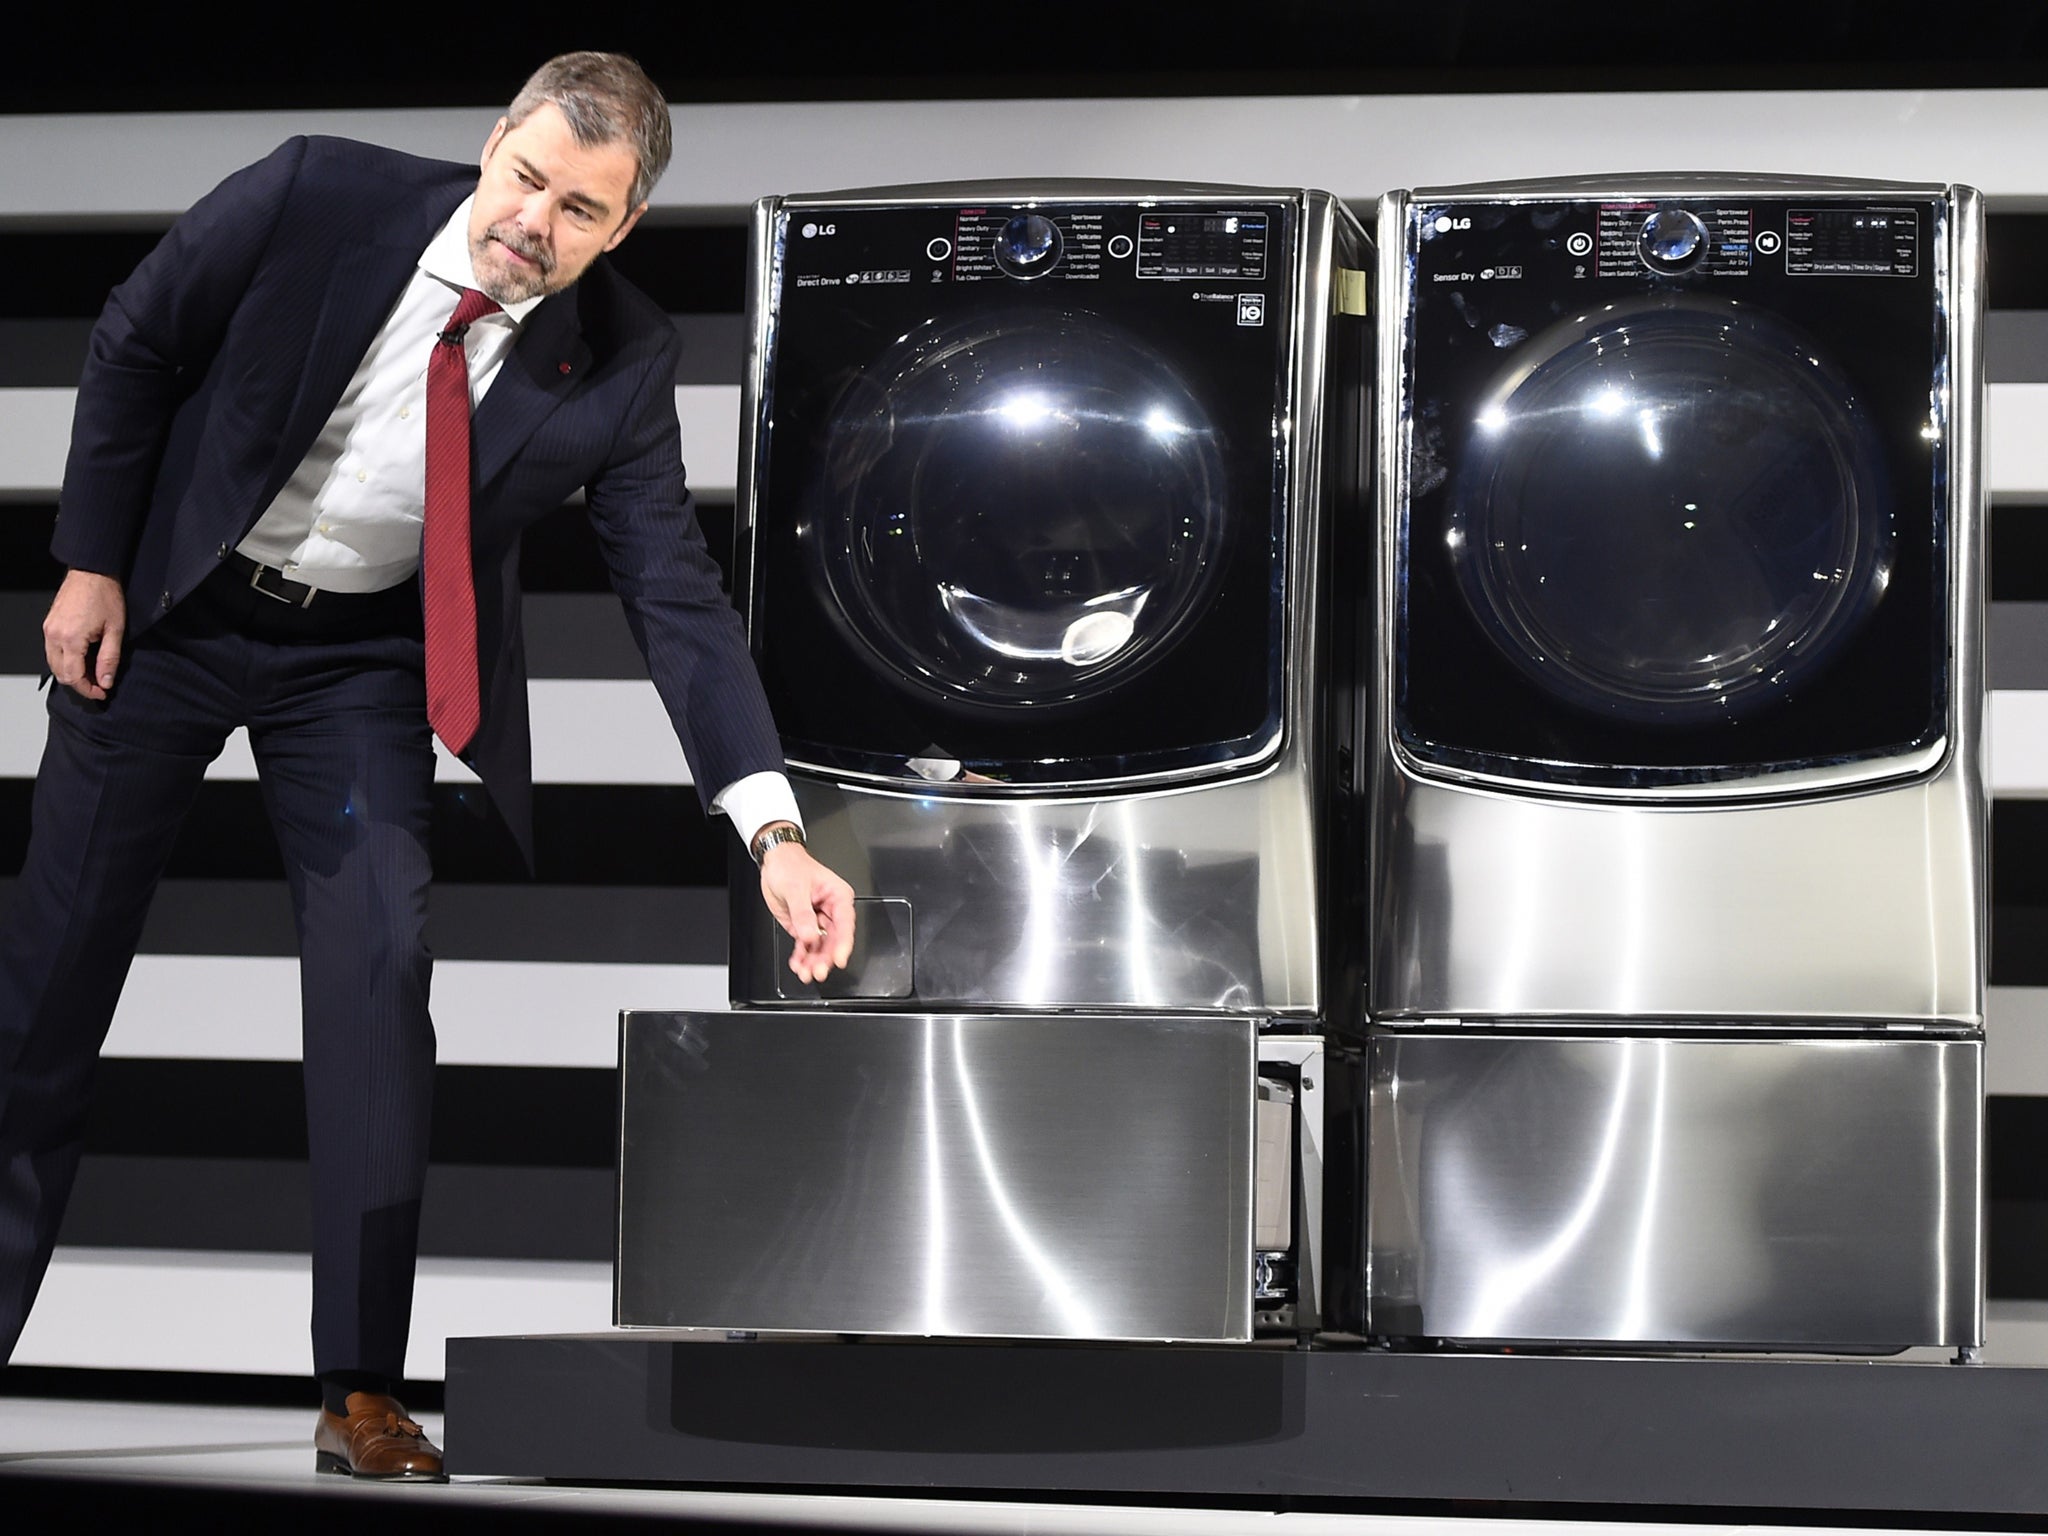 LG introduces the twin wash washing machines at CES